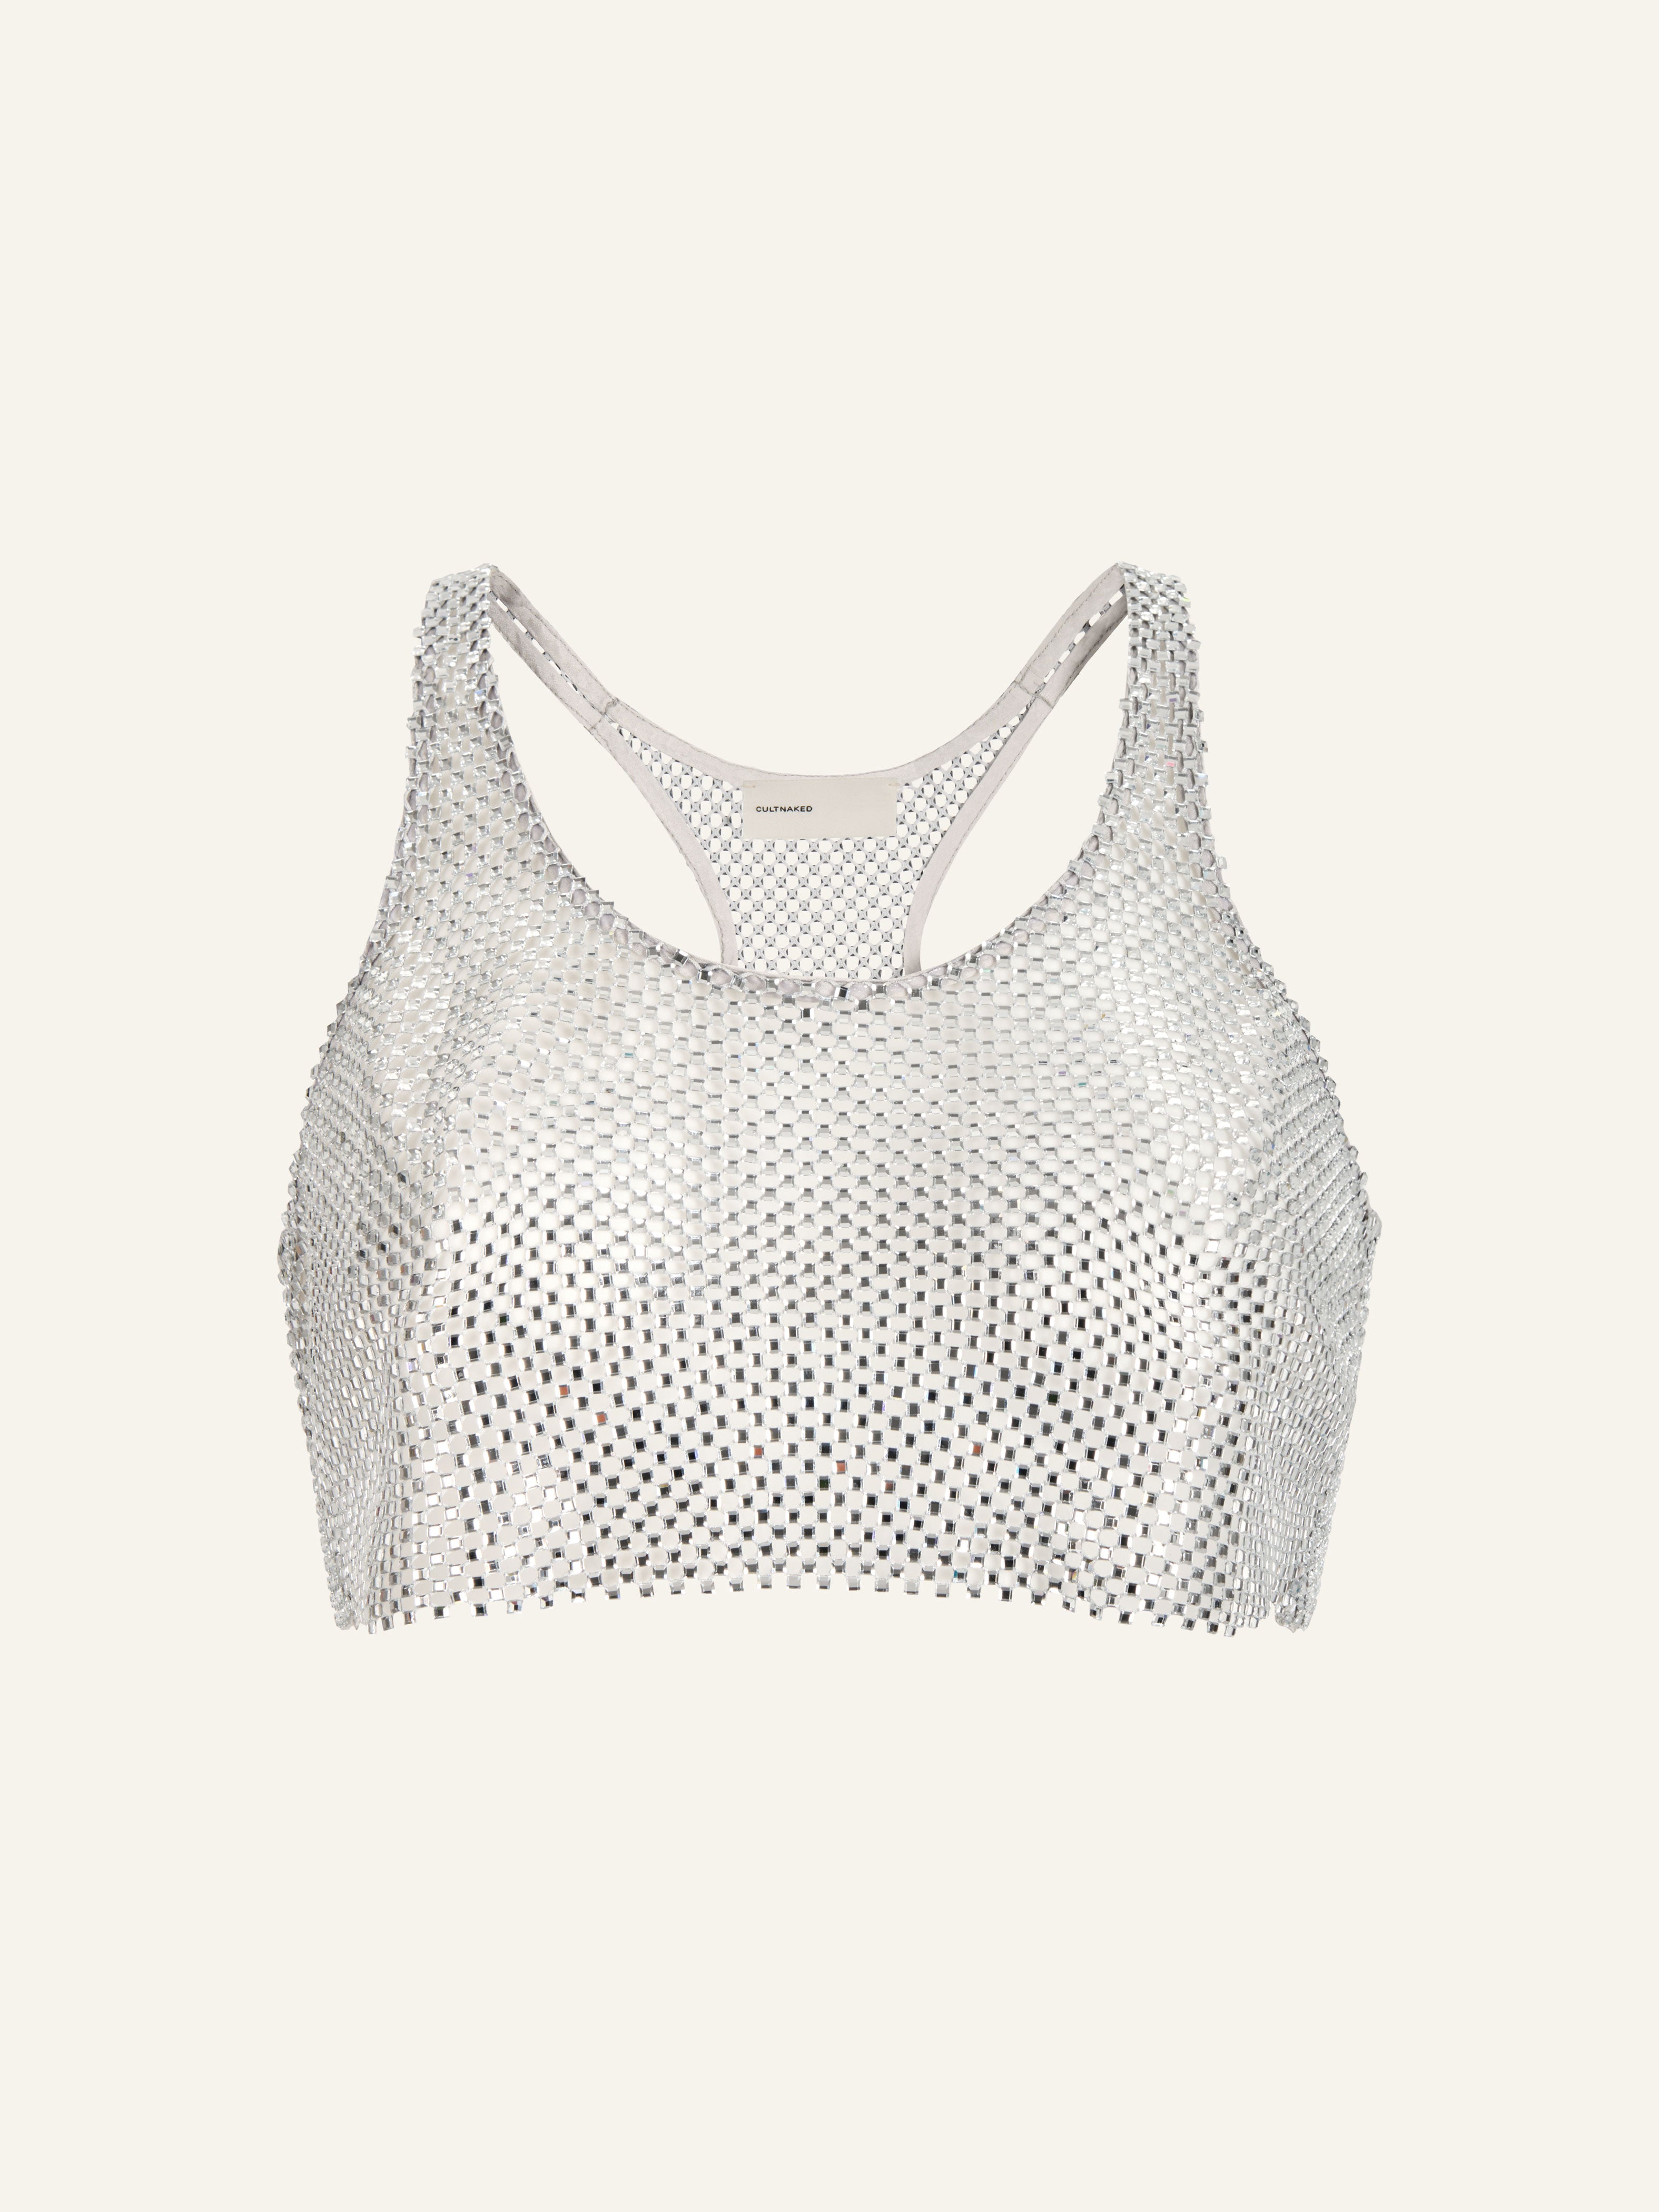 Product photo of a grey net cropped tank top decorated with rhinestones